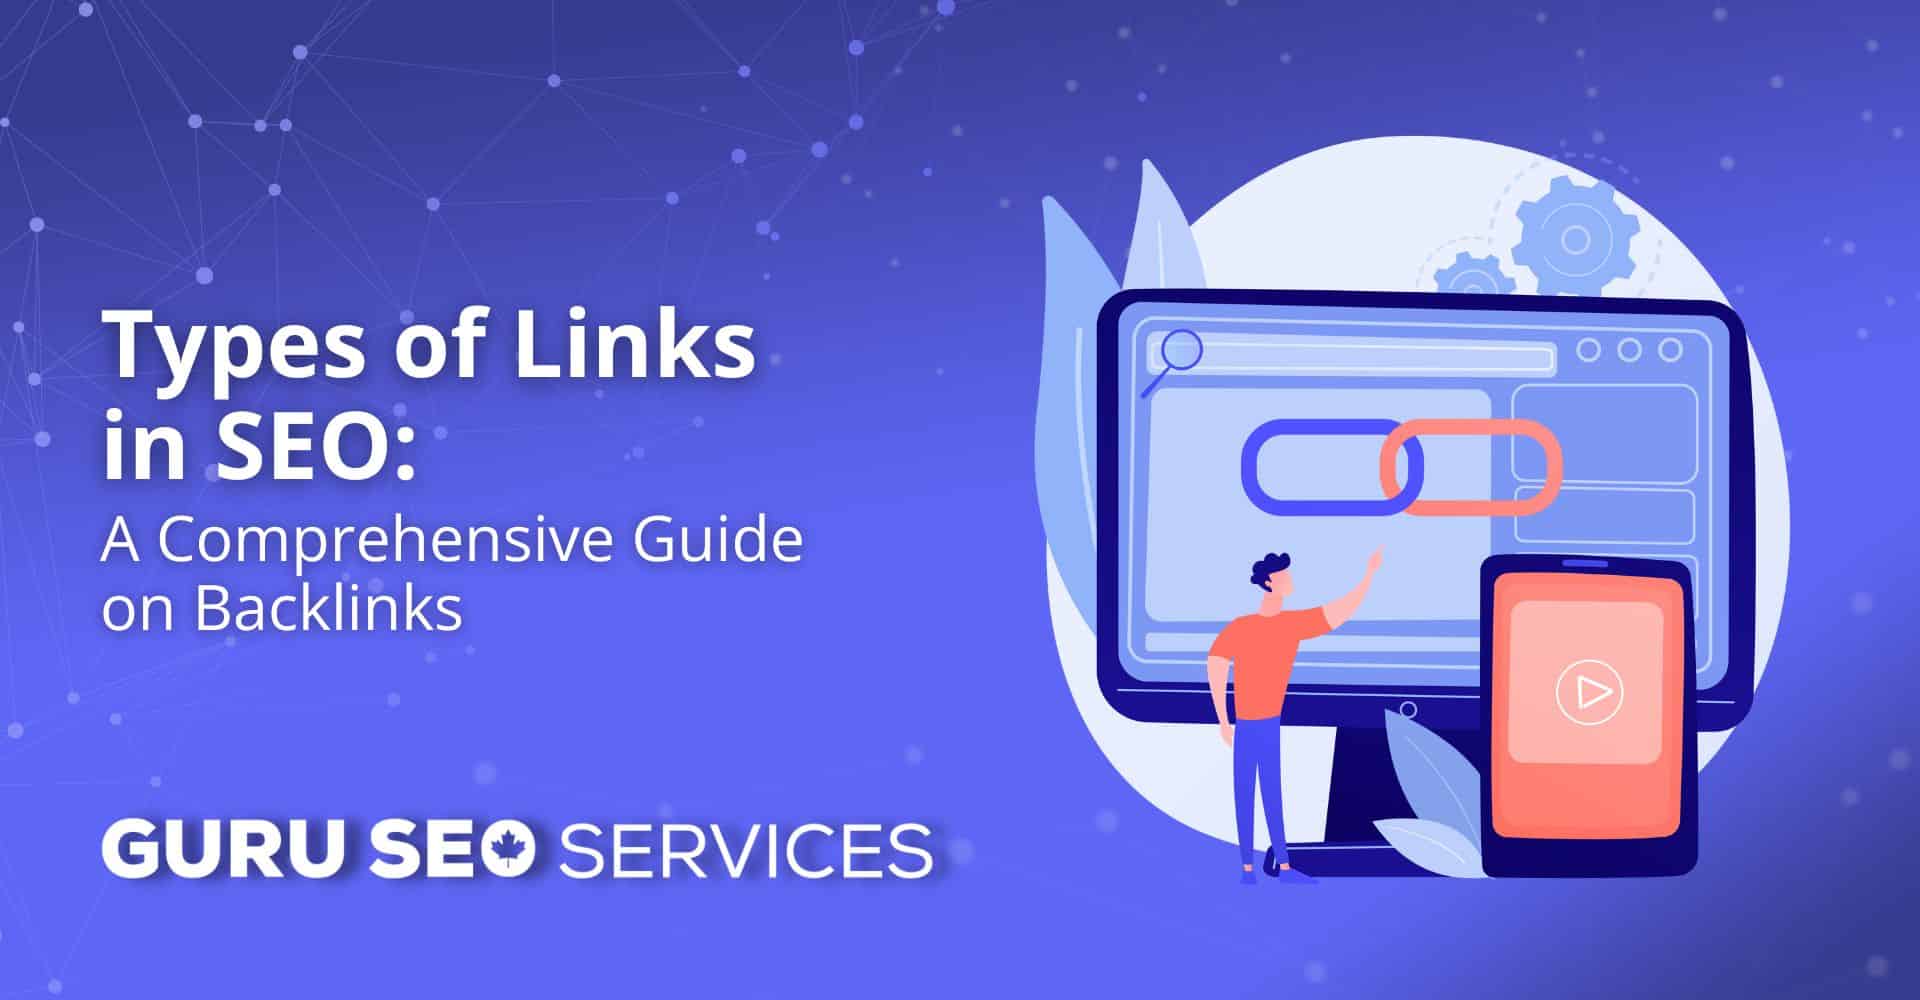 The comprehensive guide to different types of backlinks in SEO services.